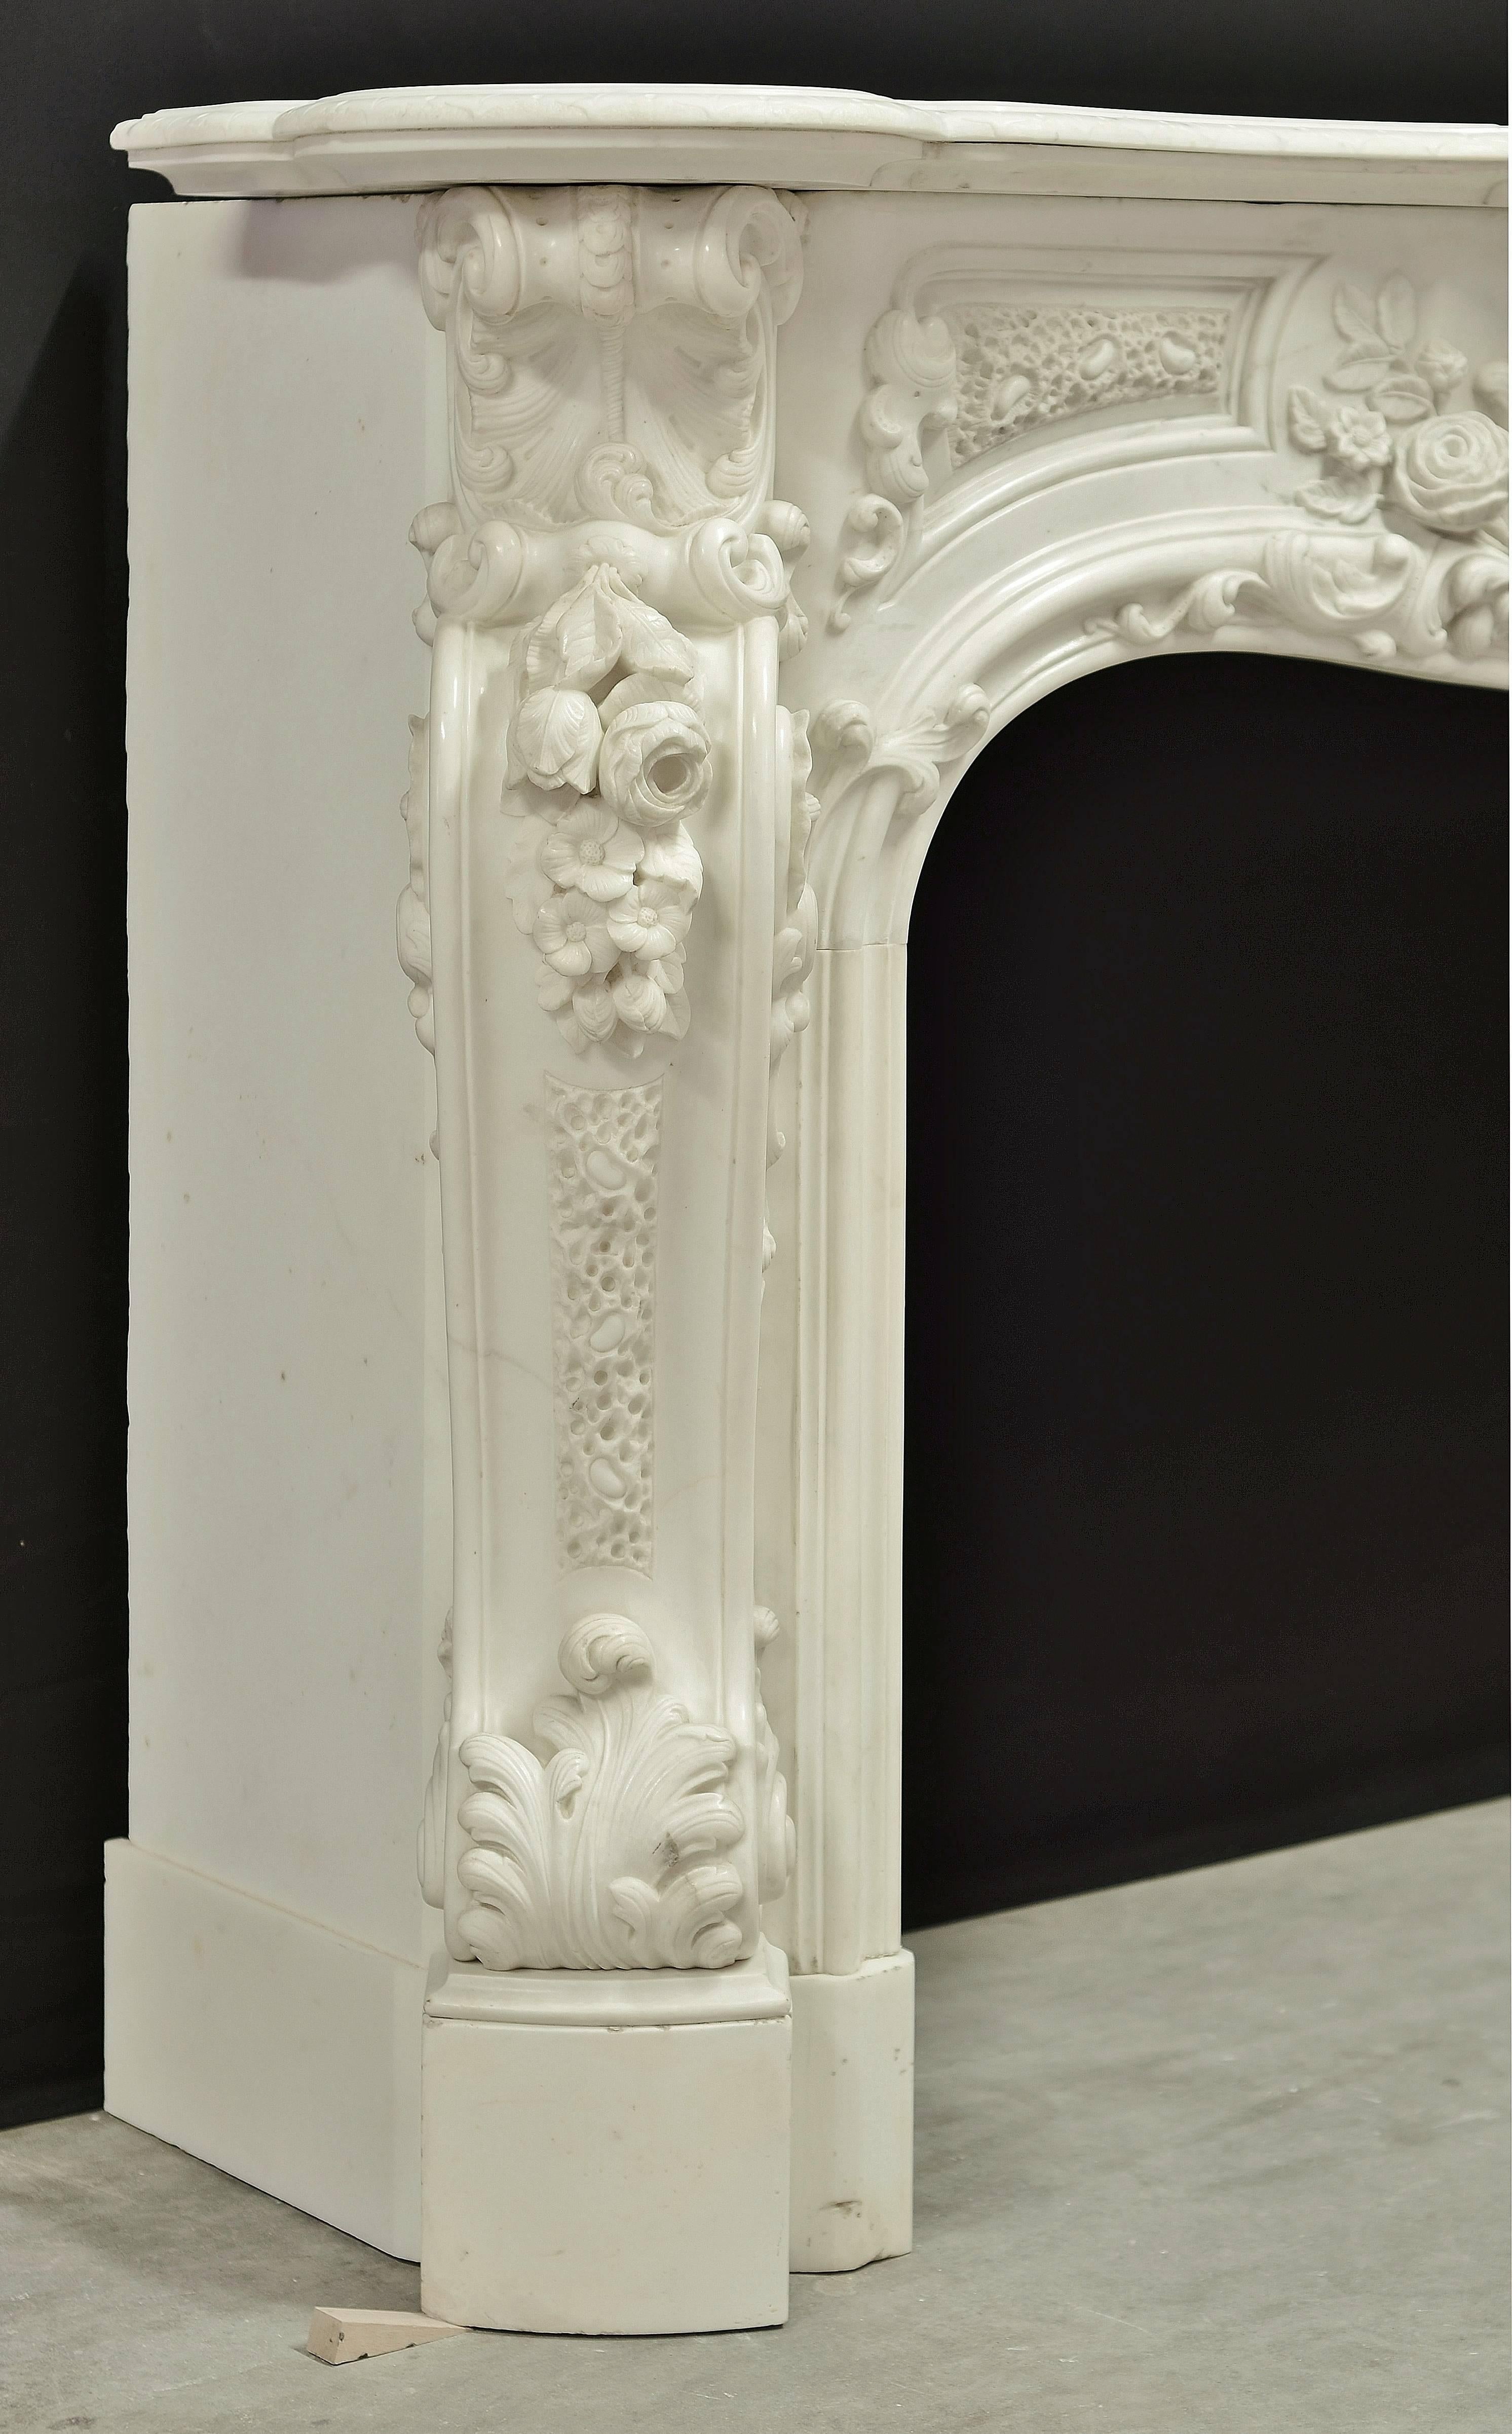 Carved Beautiful, Highly Ornated Floral White Marble Louis XV Fireplace Mantel